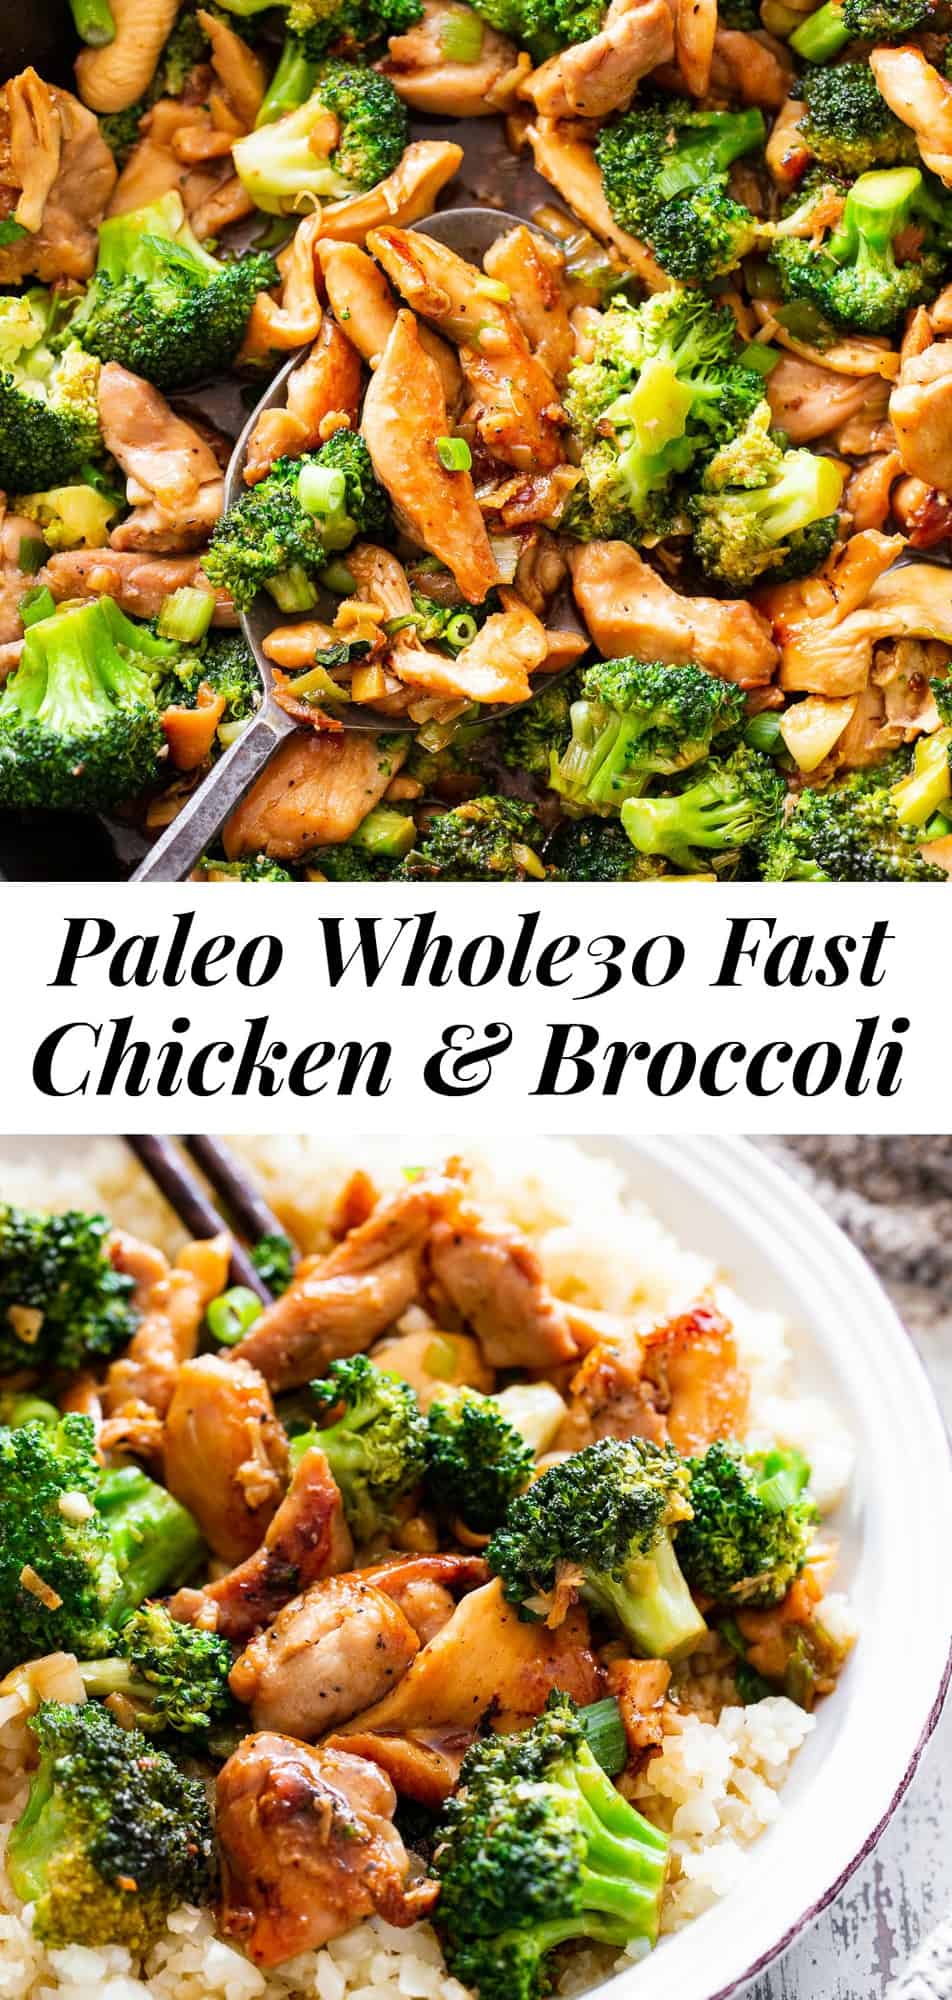 This quick and tasty paleo chicken and broccoli stir fry uses clean simple ingredients and is so much healthier than takeout but just as fast! It’s family approved and great for weeknight dinners. I love serving it over fried cauliflower rice to keep it paleo, Whole30 compliant and low carb too. #paleo #whole30 #cleaneating #keto